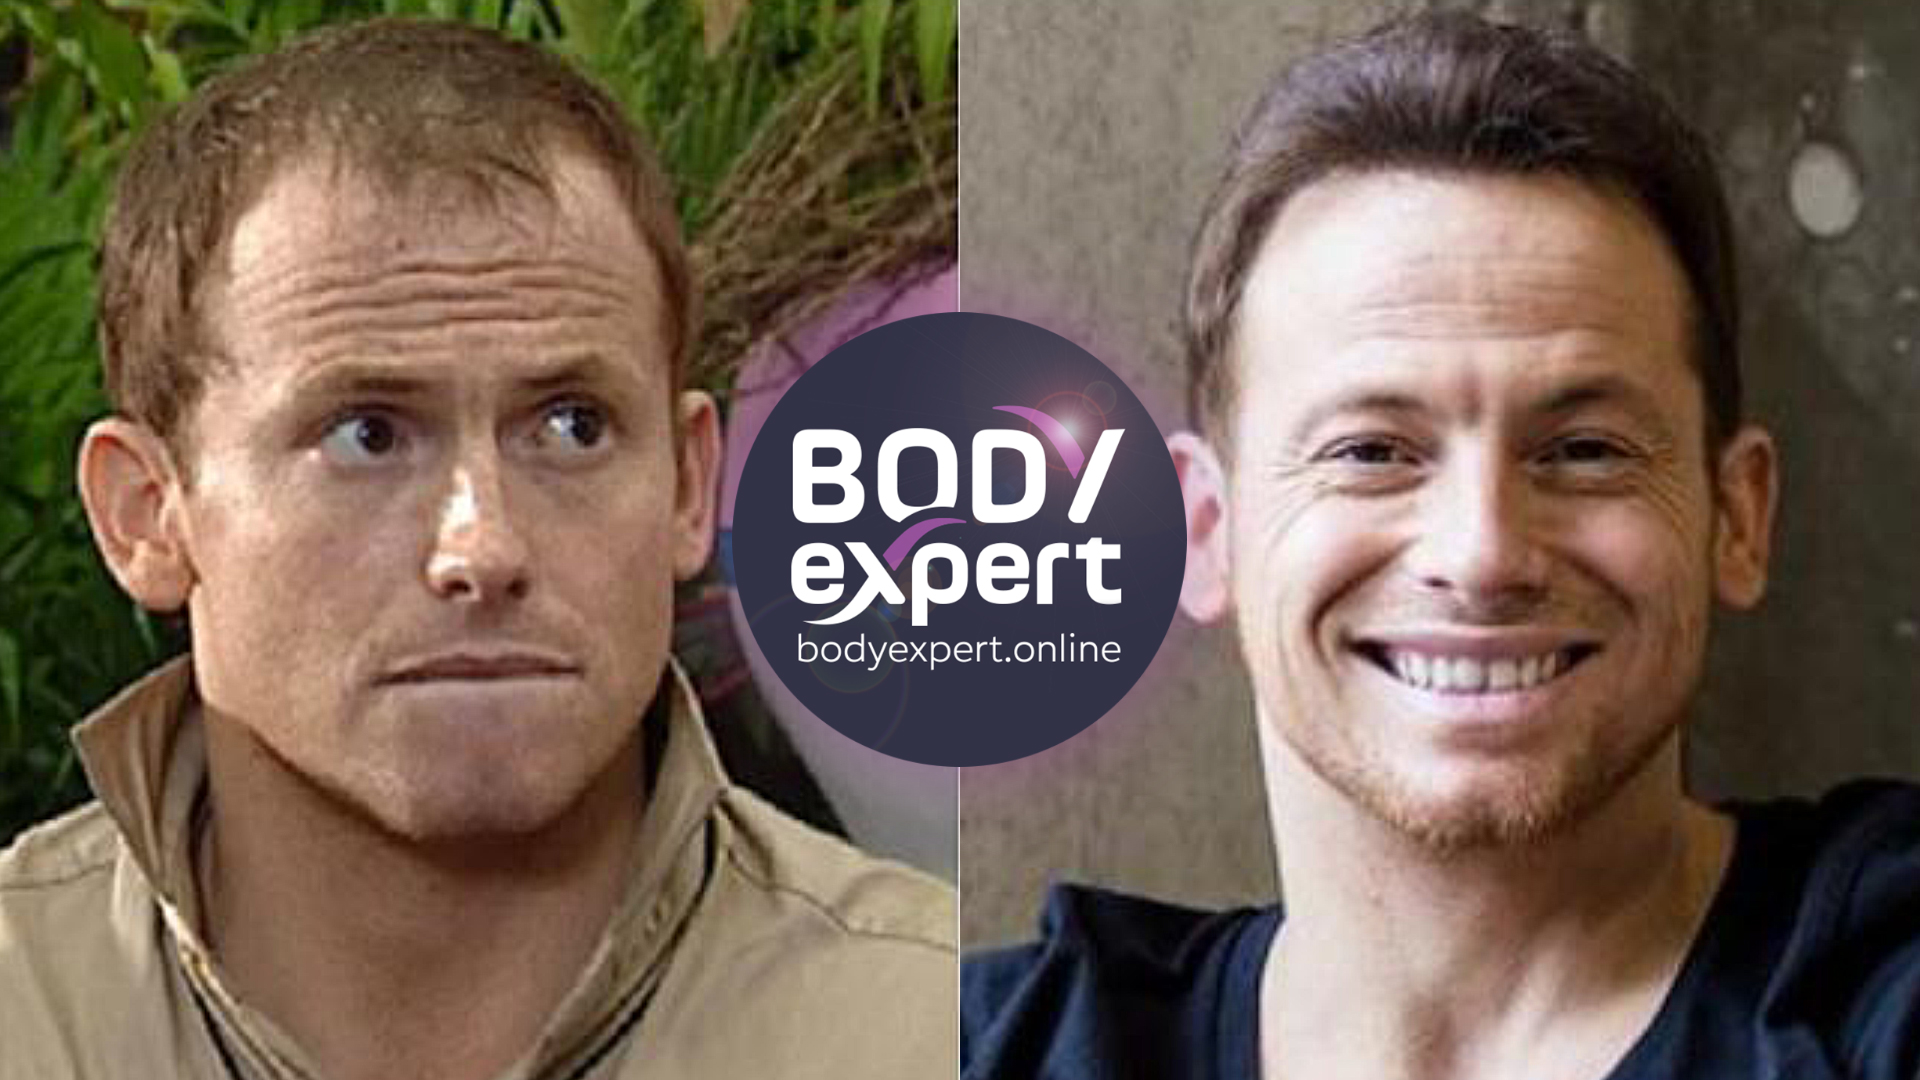 has Joe Swash had a hair transplant? Yes early on in his career..